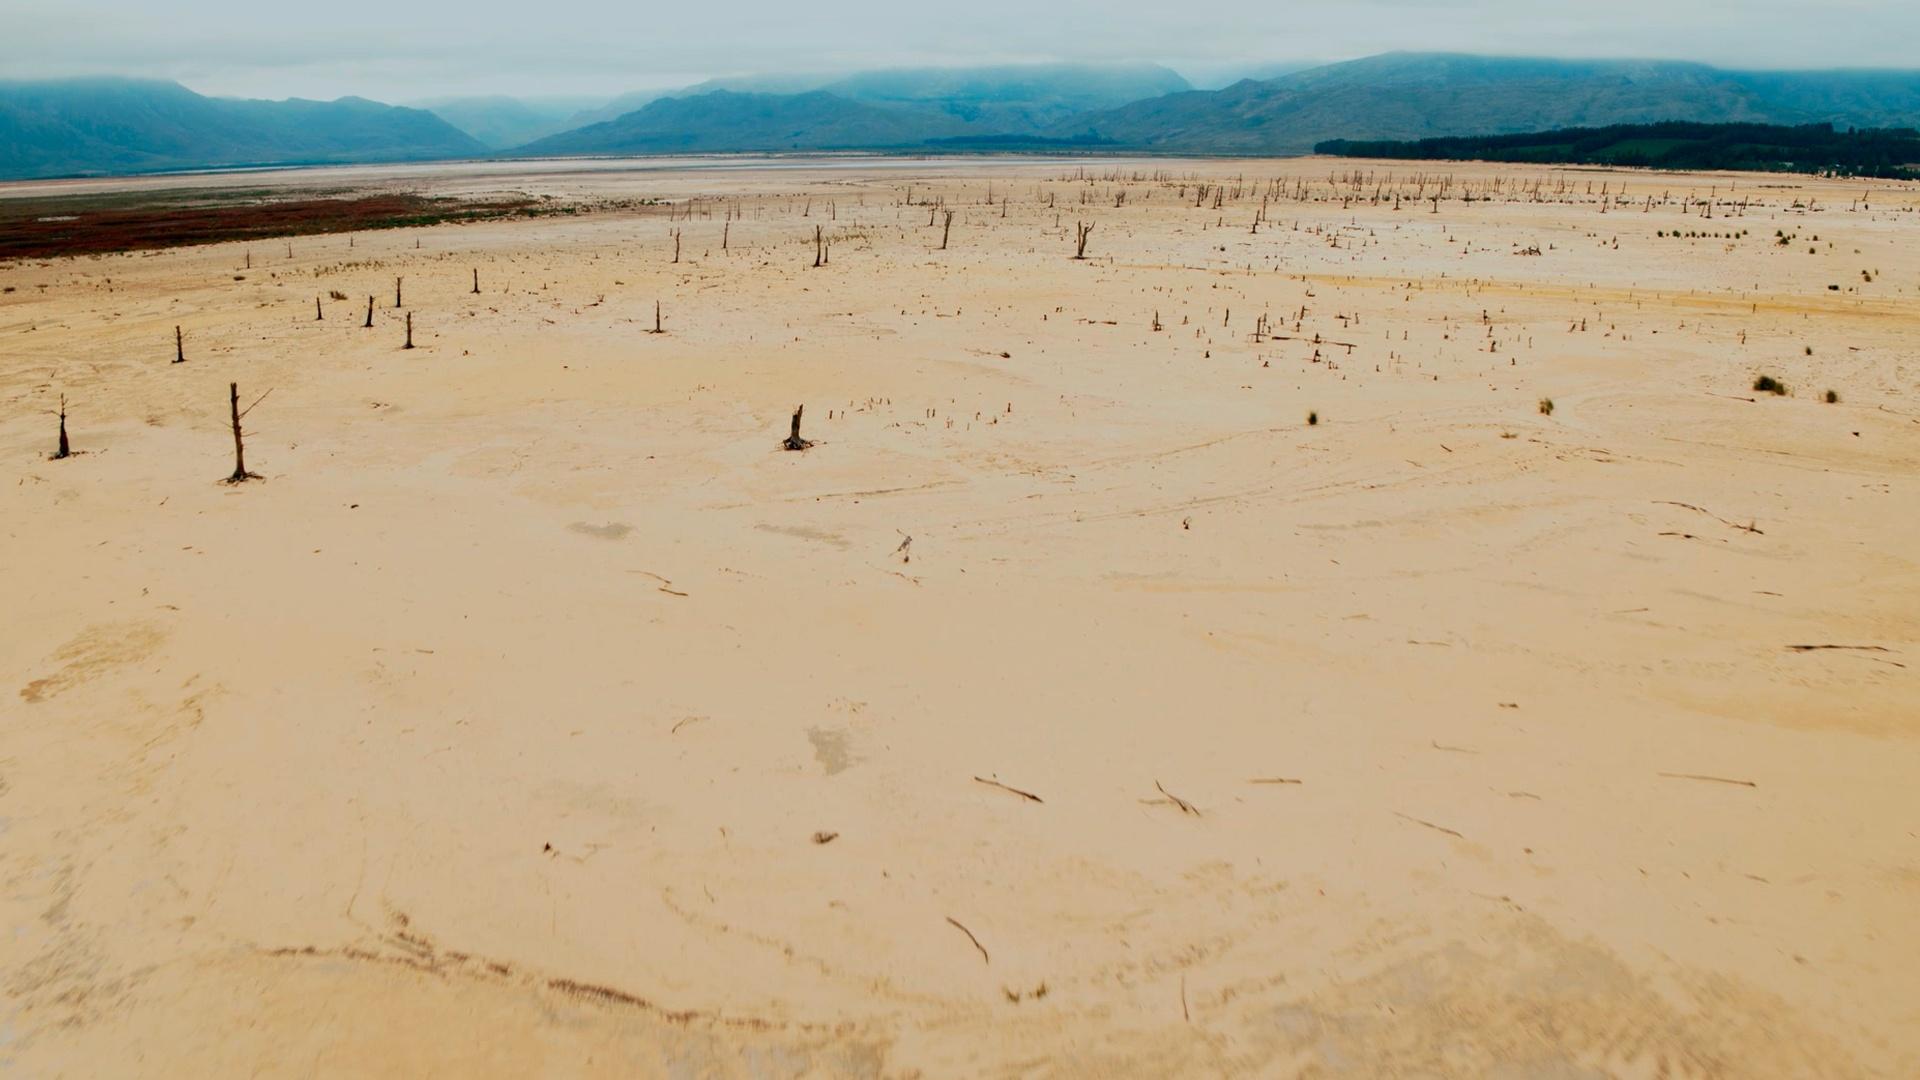 In 2015, a five year drought hit South Africa's main reservoir turning it into a dustbowl. Cape Town residents faced "day zero", where the taps would turn off.